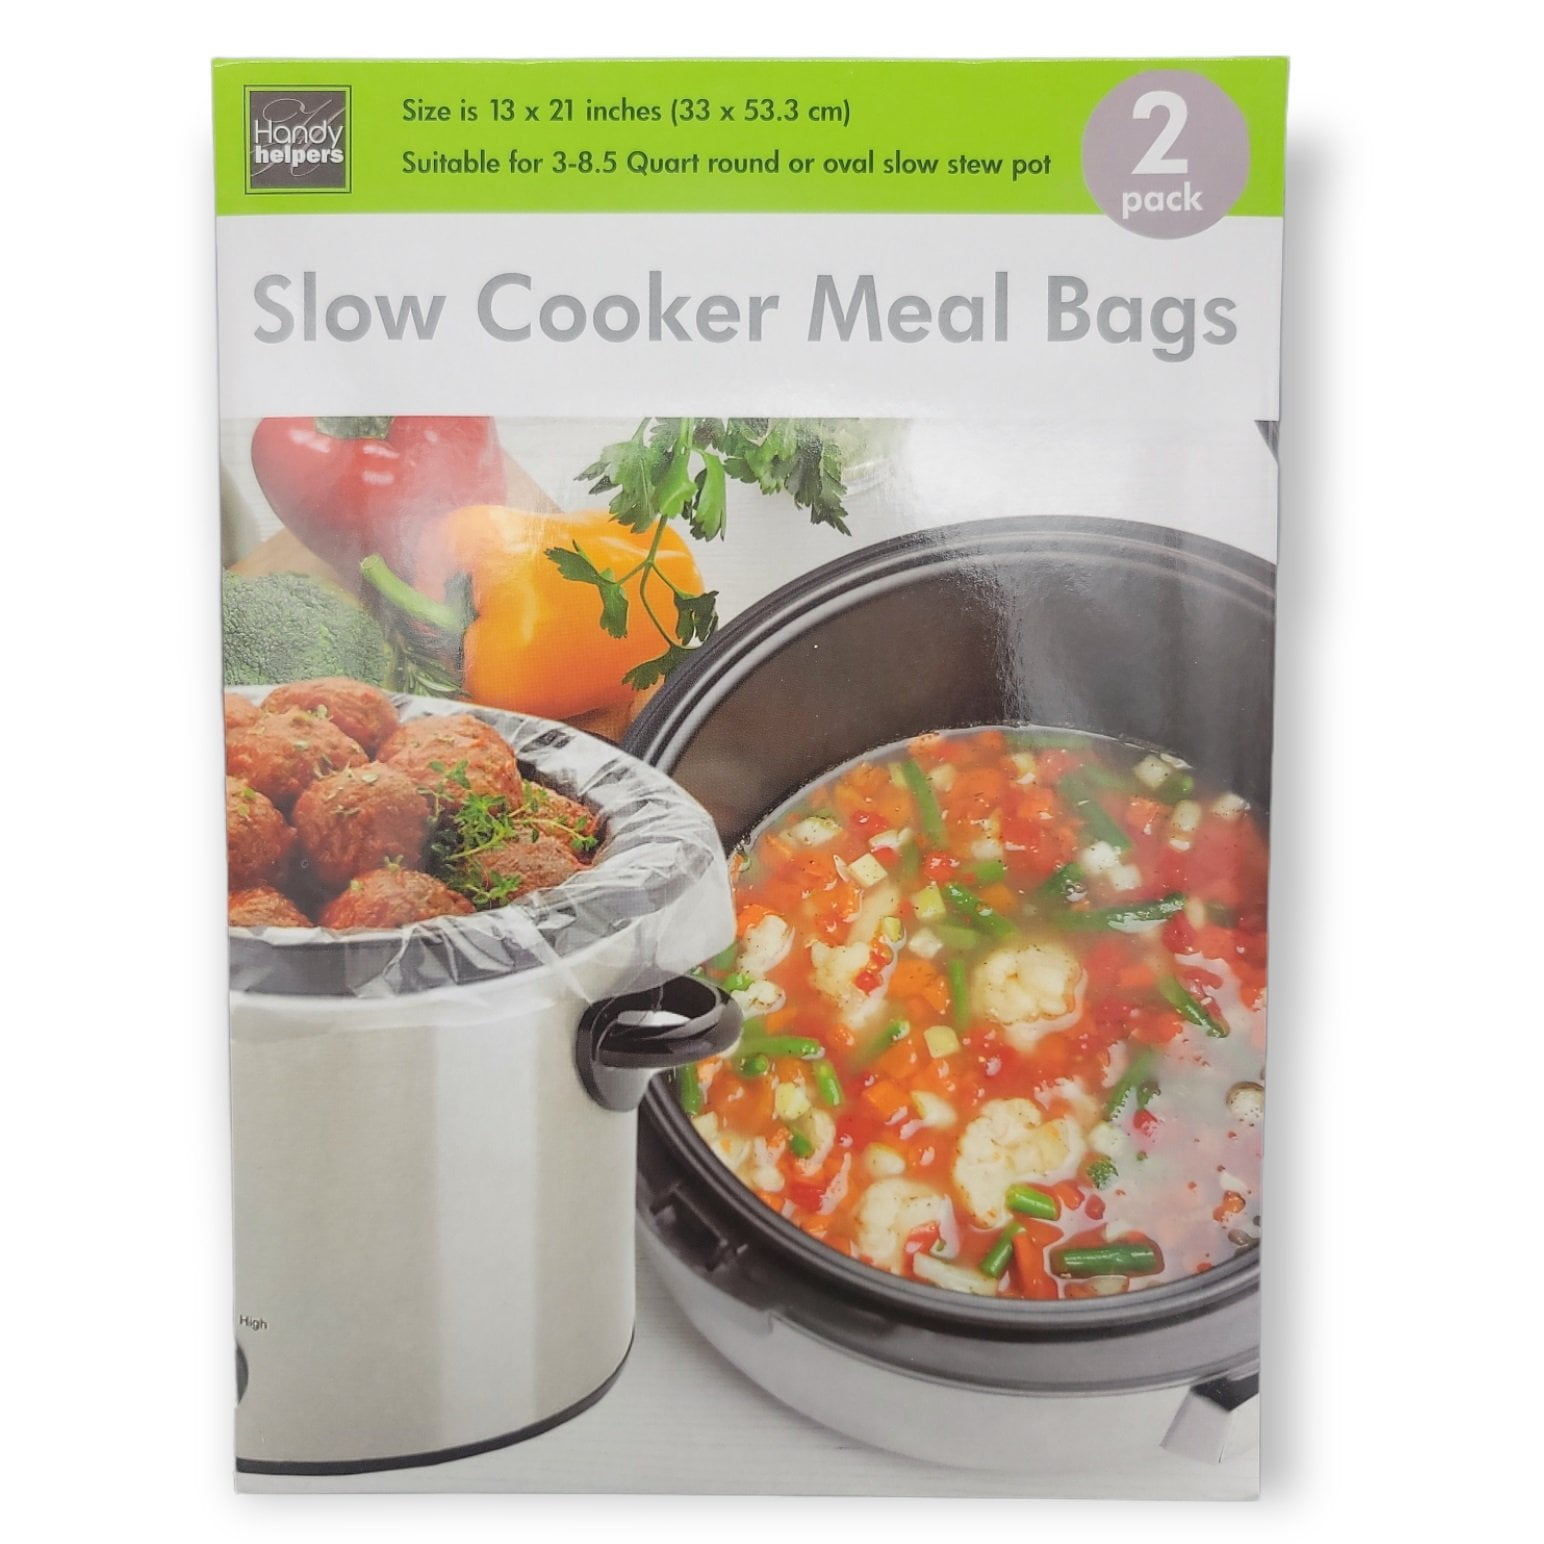 ECOOPTS Slow Cooker Liners Disposable Cooking Bags Small Size Pot Liners  Fit 1QT to 3QT Suitable for Oval & Round Pot (10)